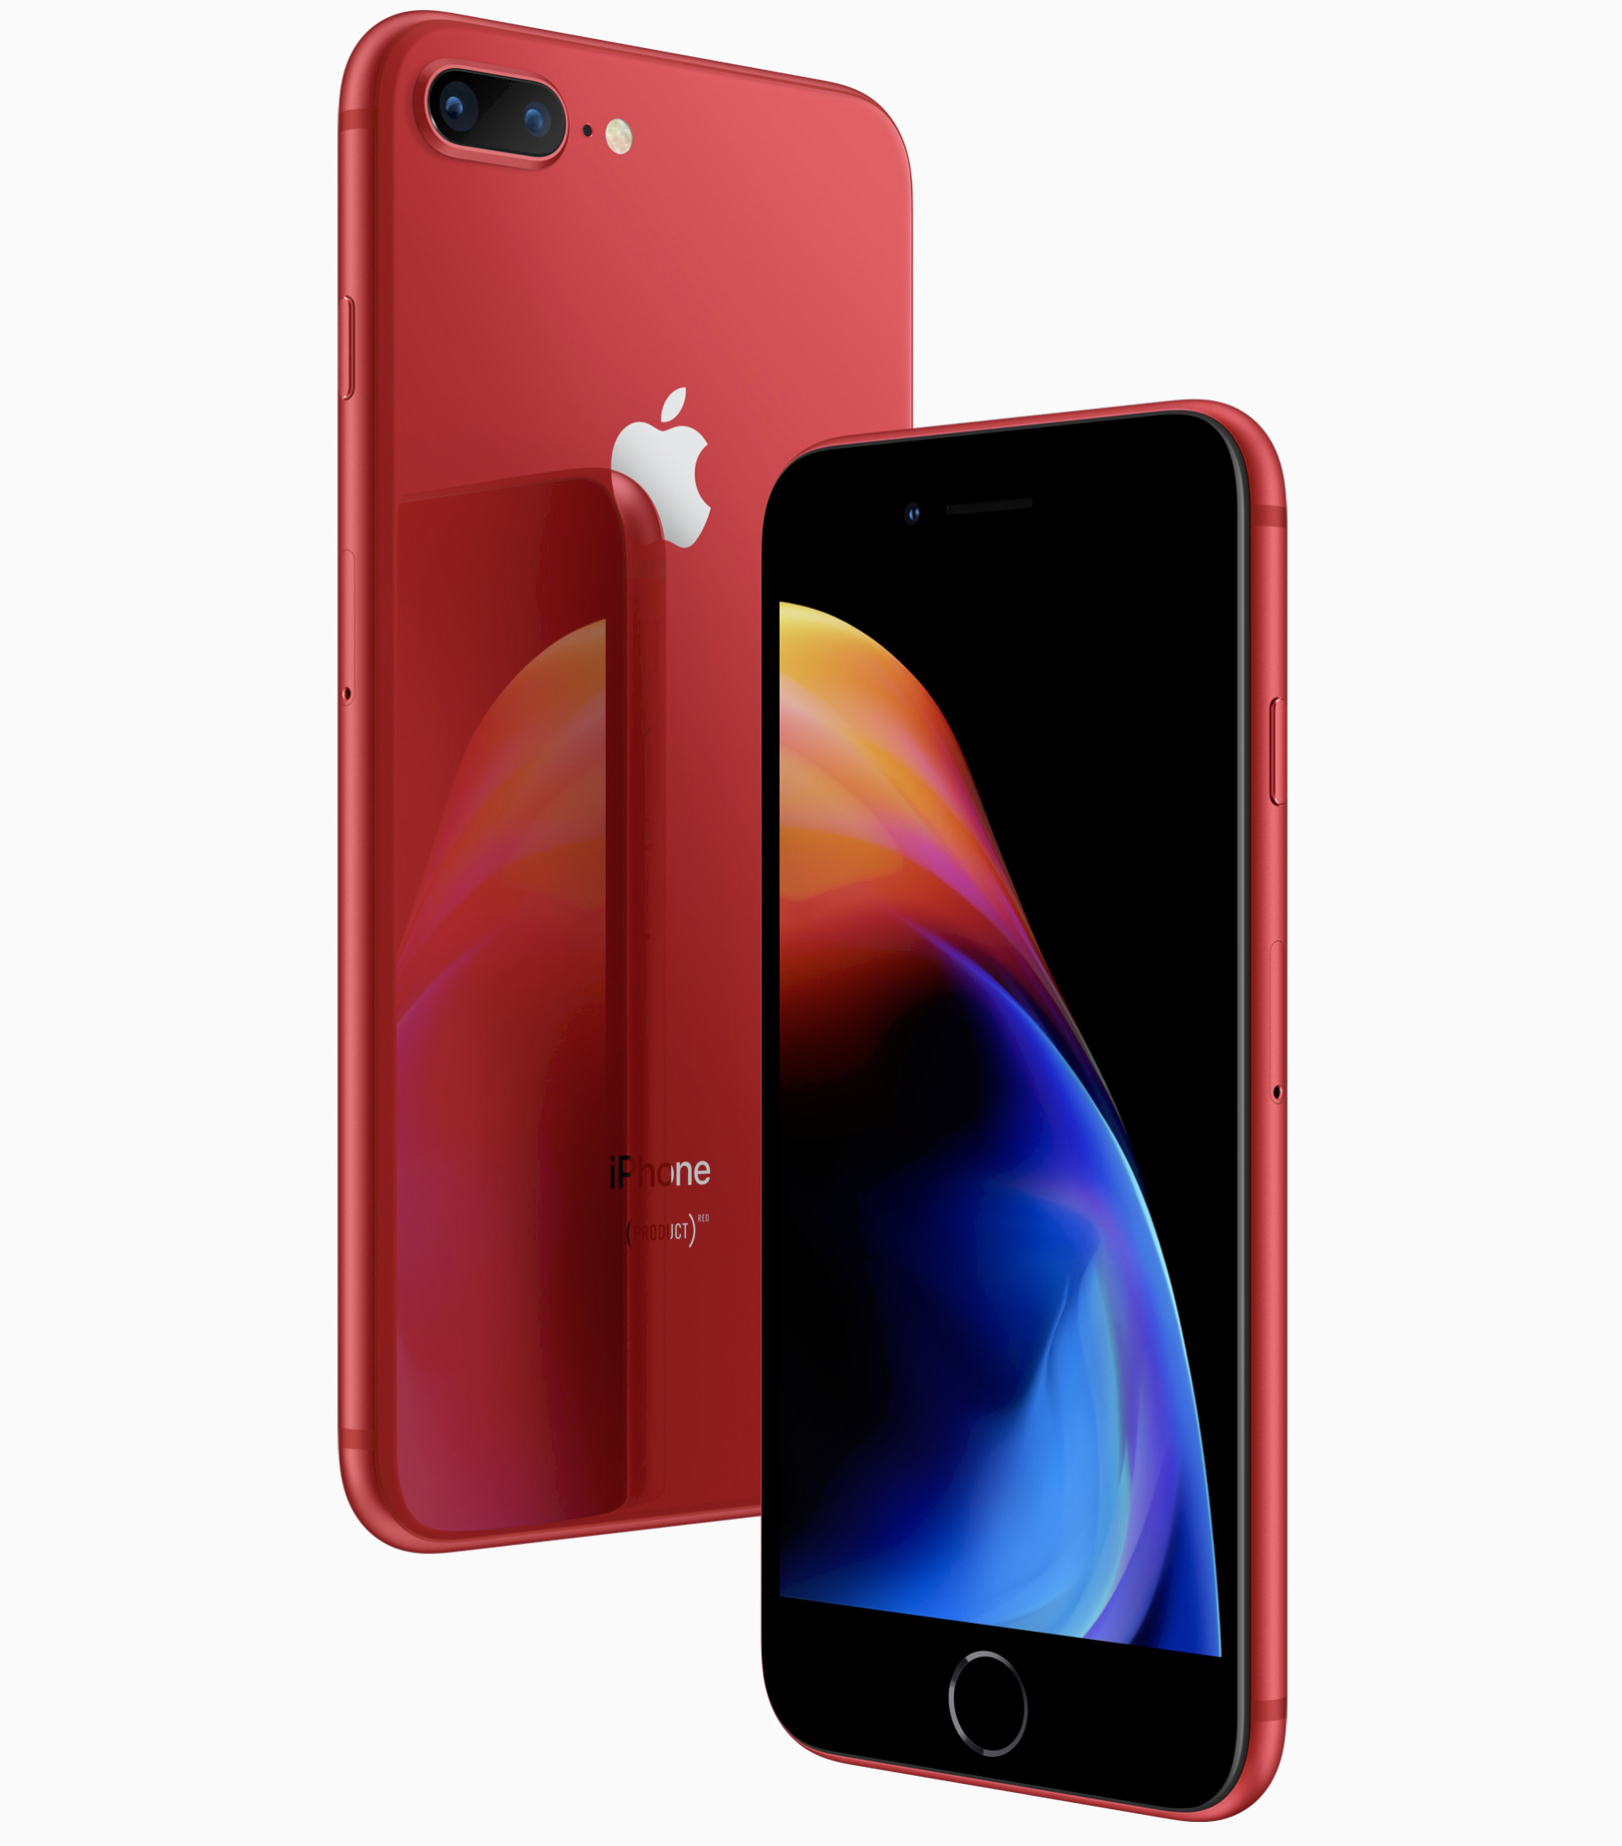 Apple Unveils Limited Edition RED iPhone 8 and iPhone 8 Plus, Available